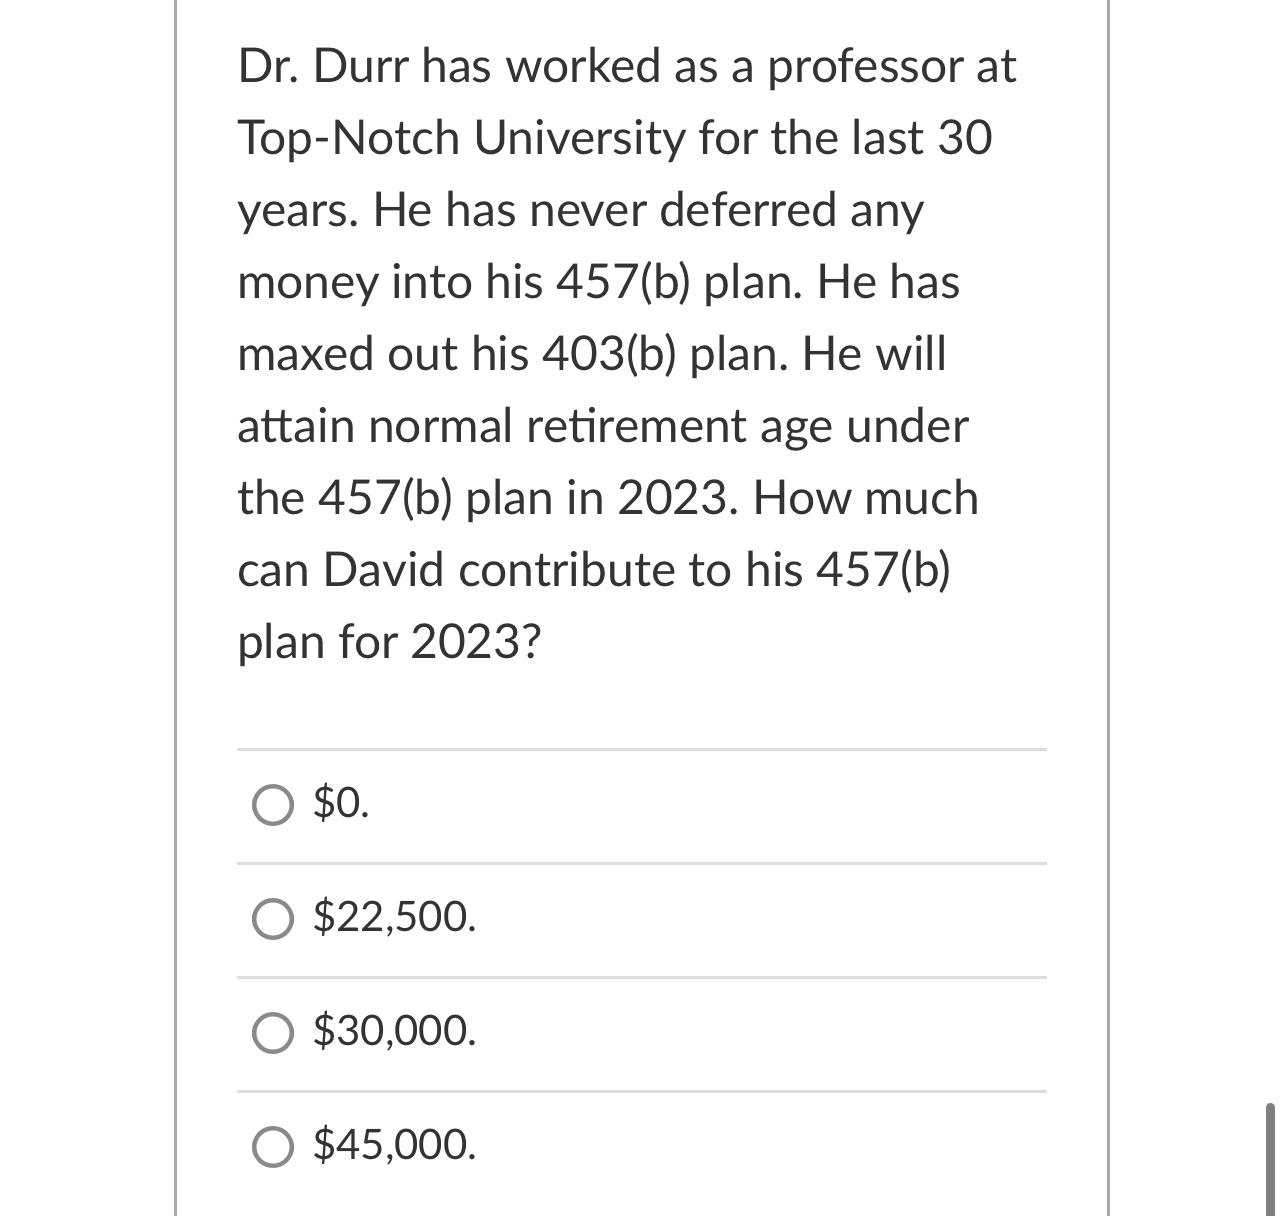 Dr. Durr has worked as a professor at Top-Notch University for the last 30 years. He has never deferred any